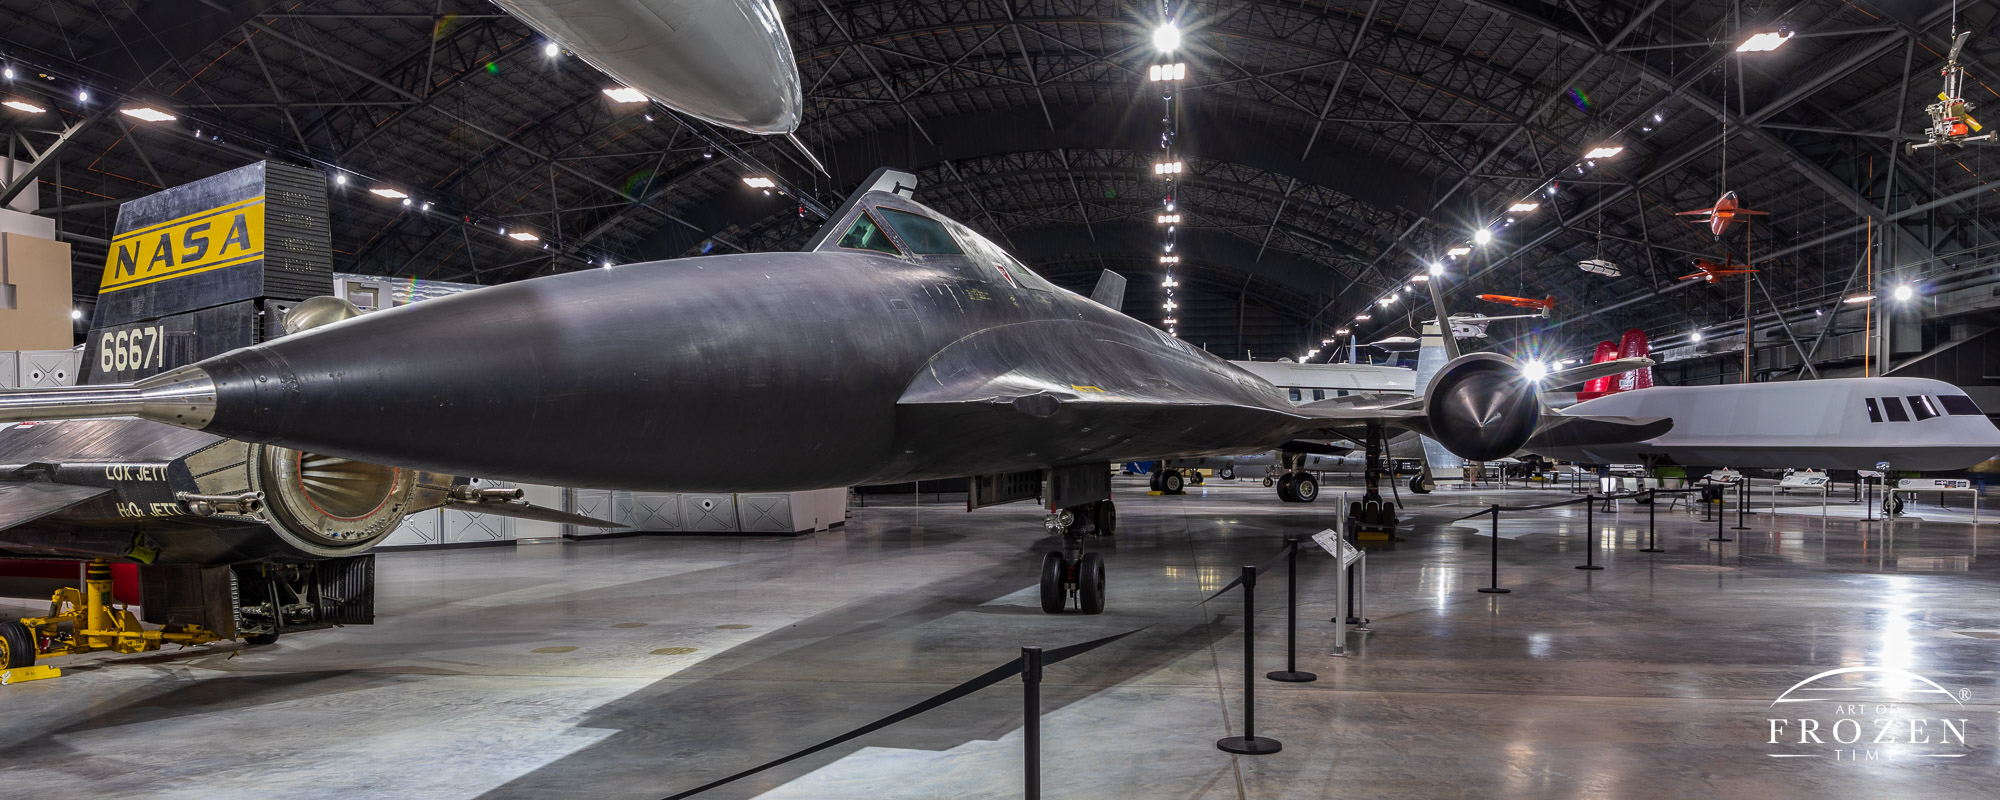 An image of the very long and black-painted YF-12 as it sits under the lights of the Air Force Museum along with other aerospace treasures.